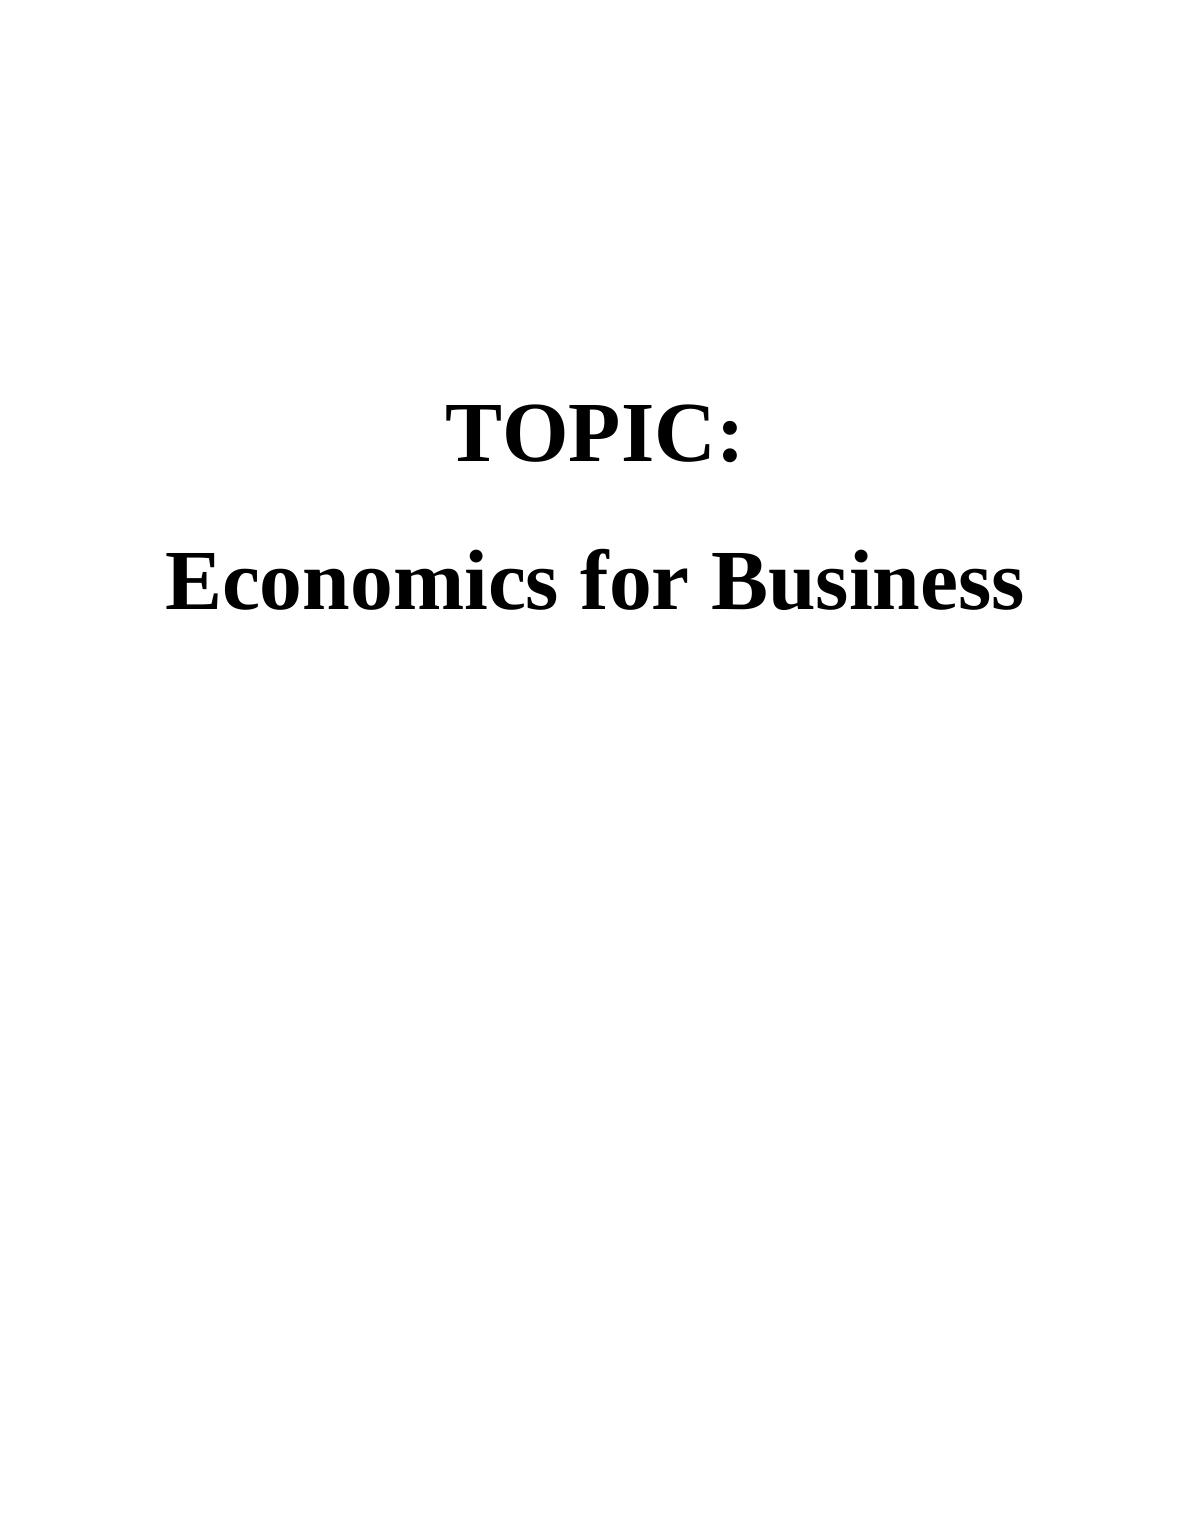 Economics for Business Assignment : Polo mint_1